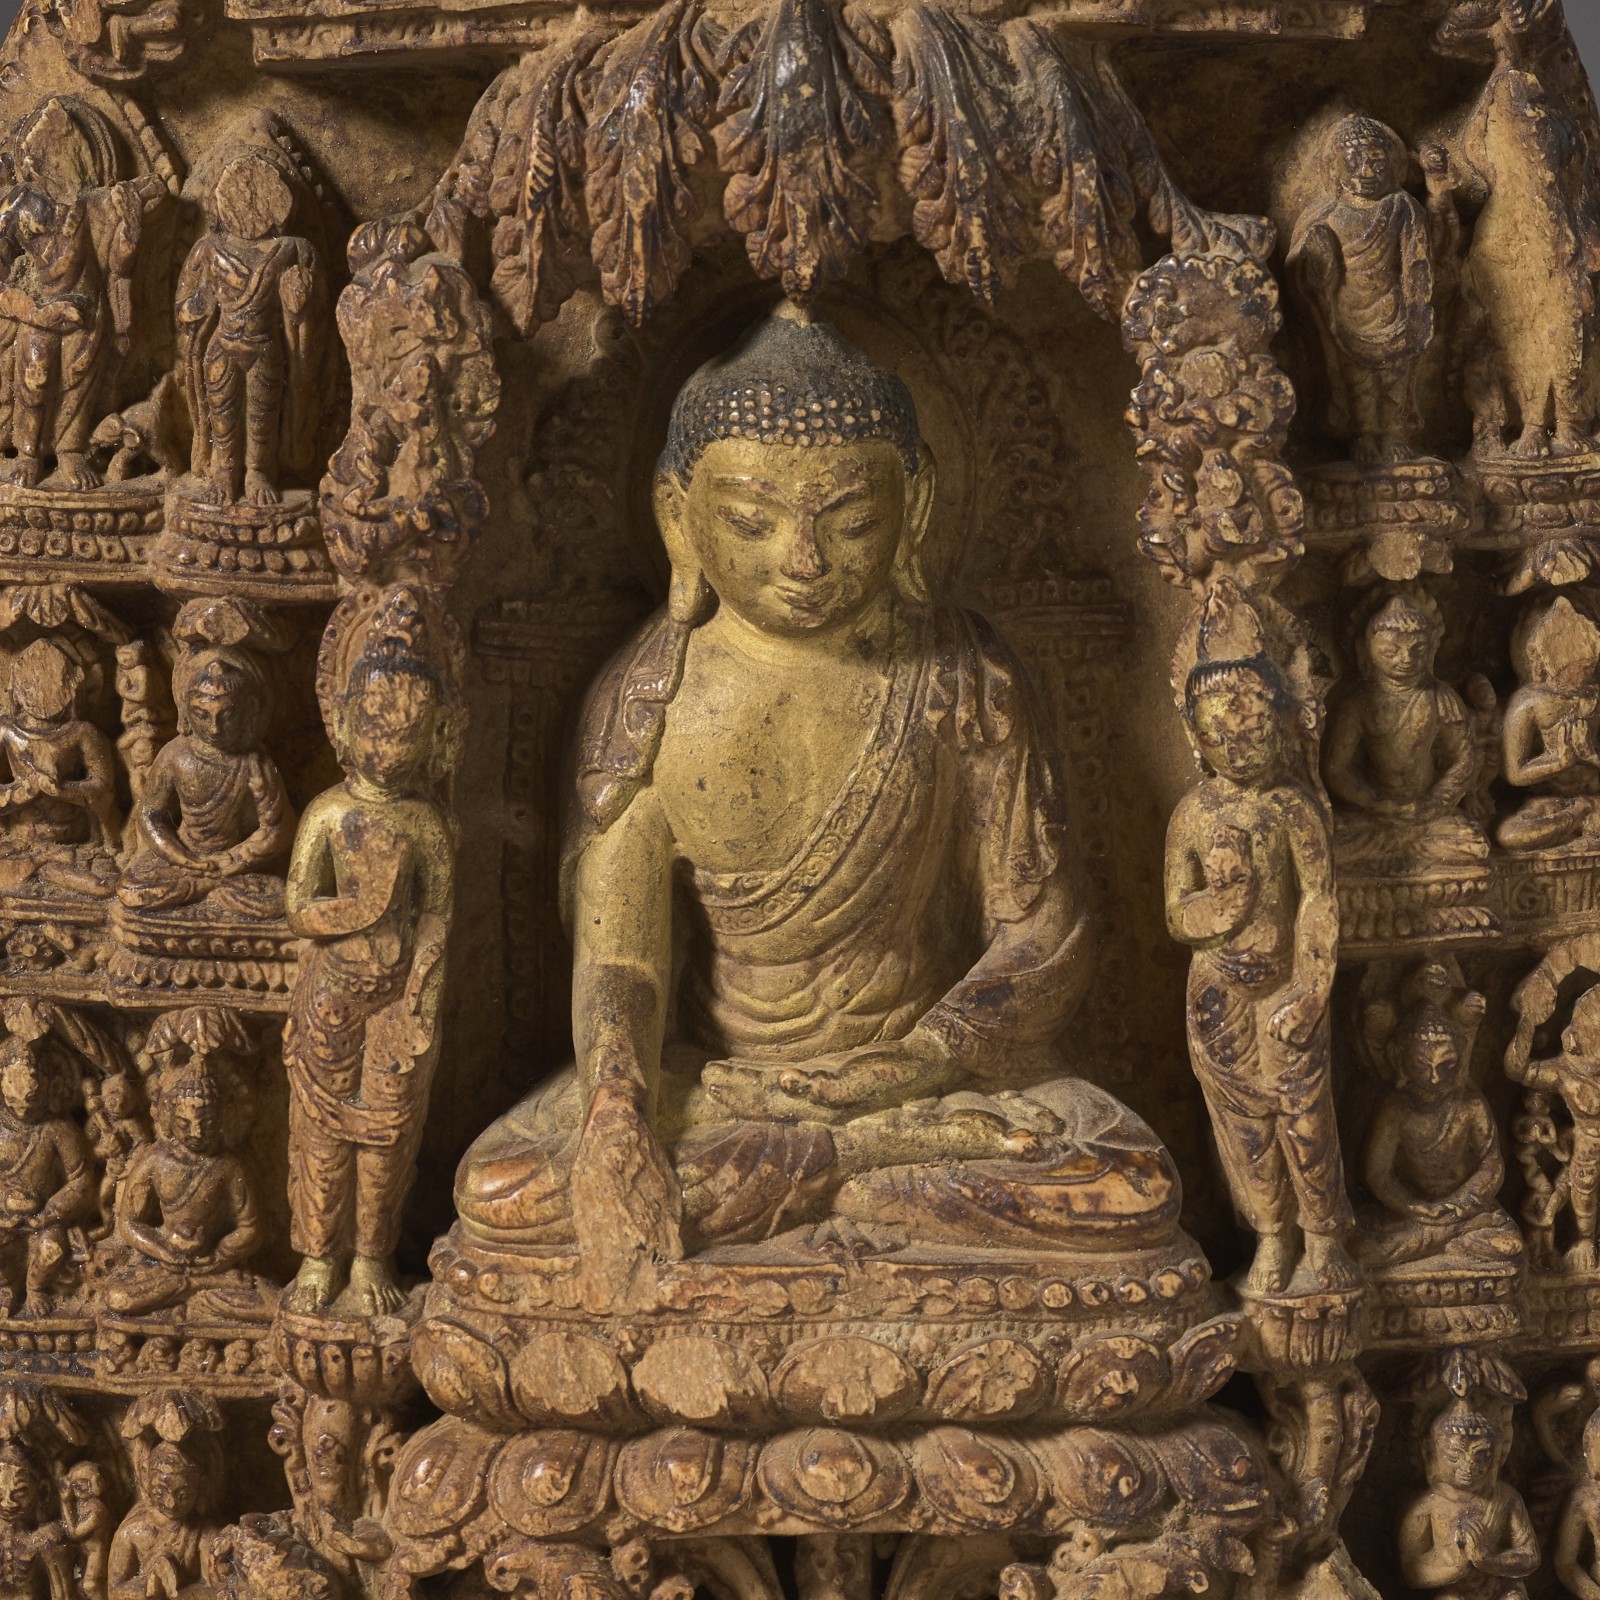 Detail of The central figure on this stele depicts the pivotal moment when Buddha triumphed over Mara, just before attaining enlightenment. 